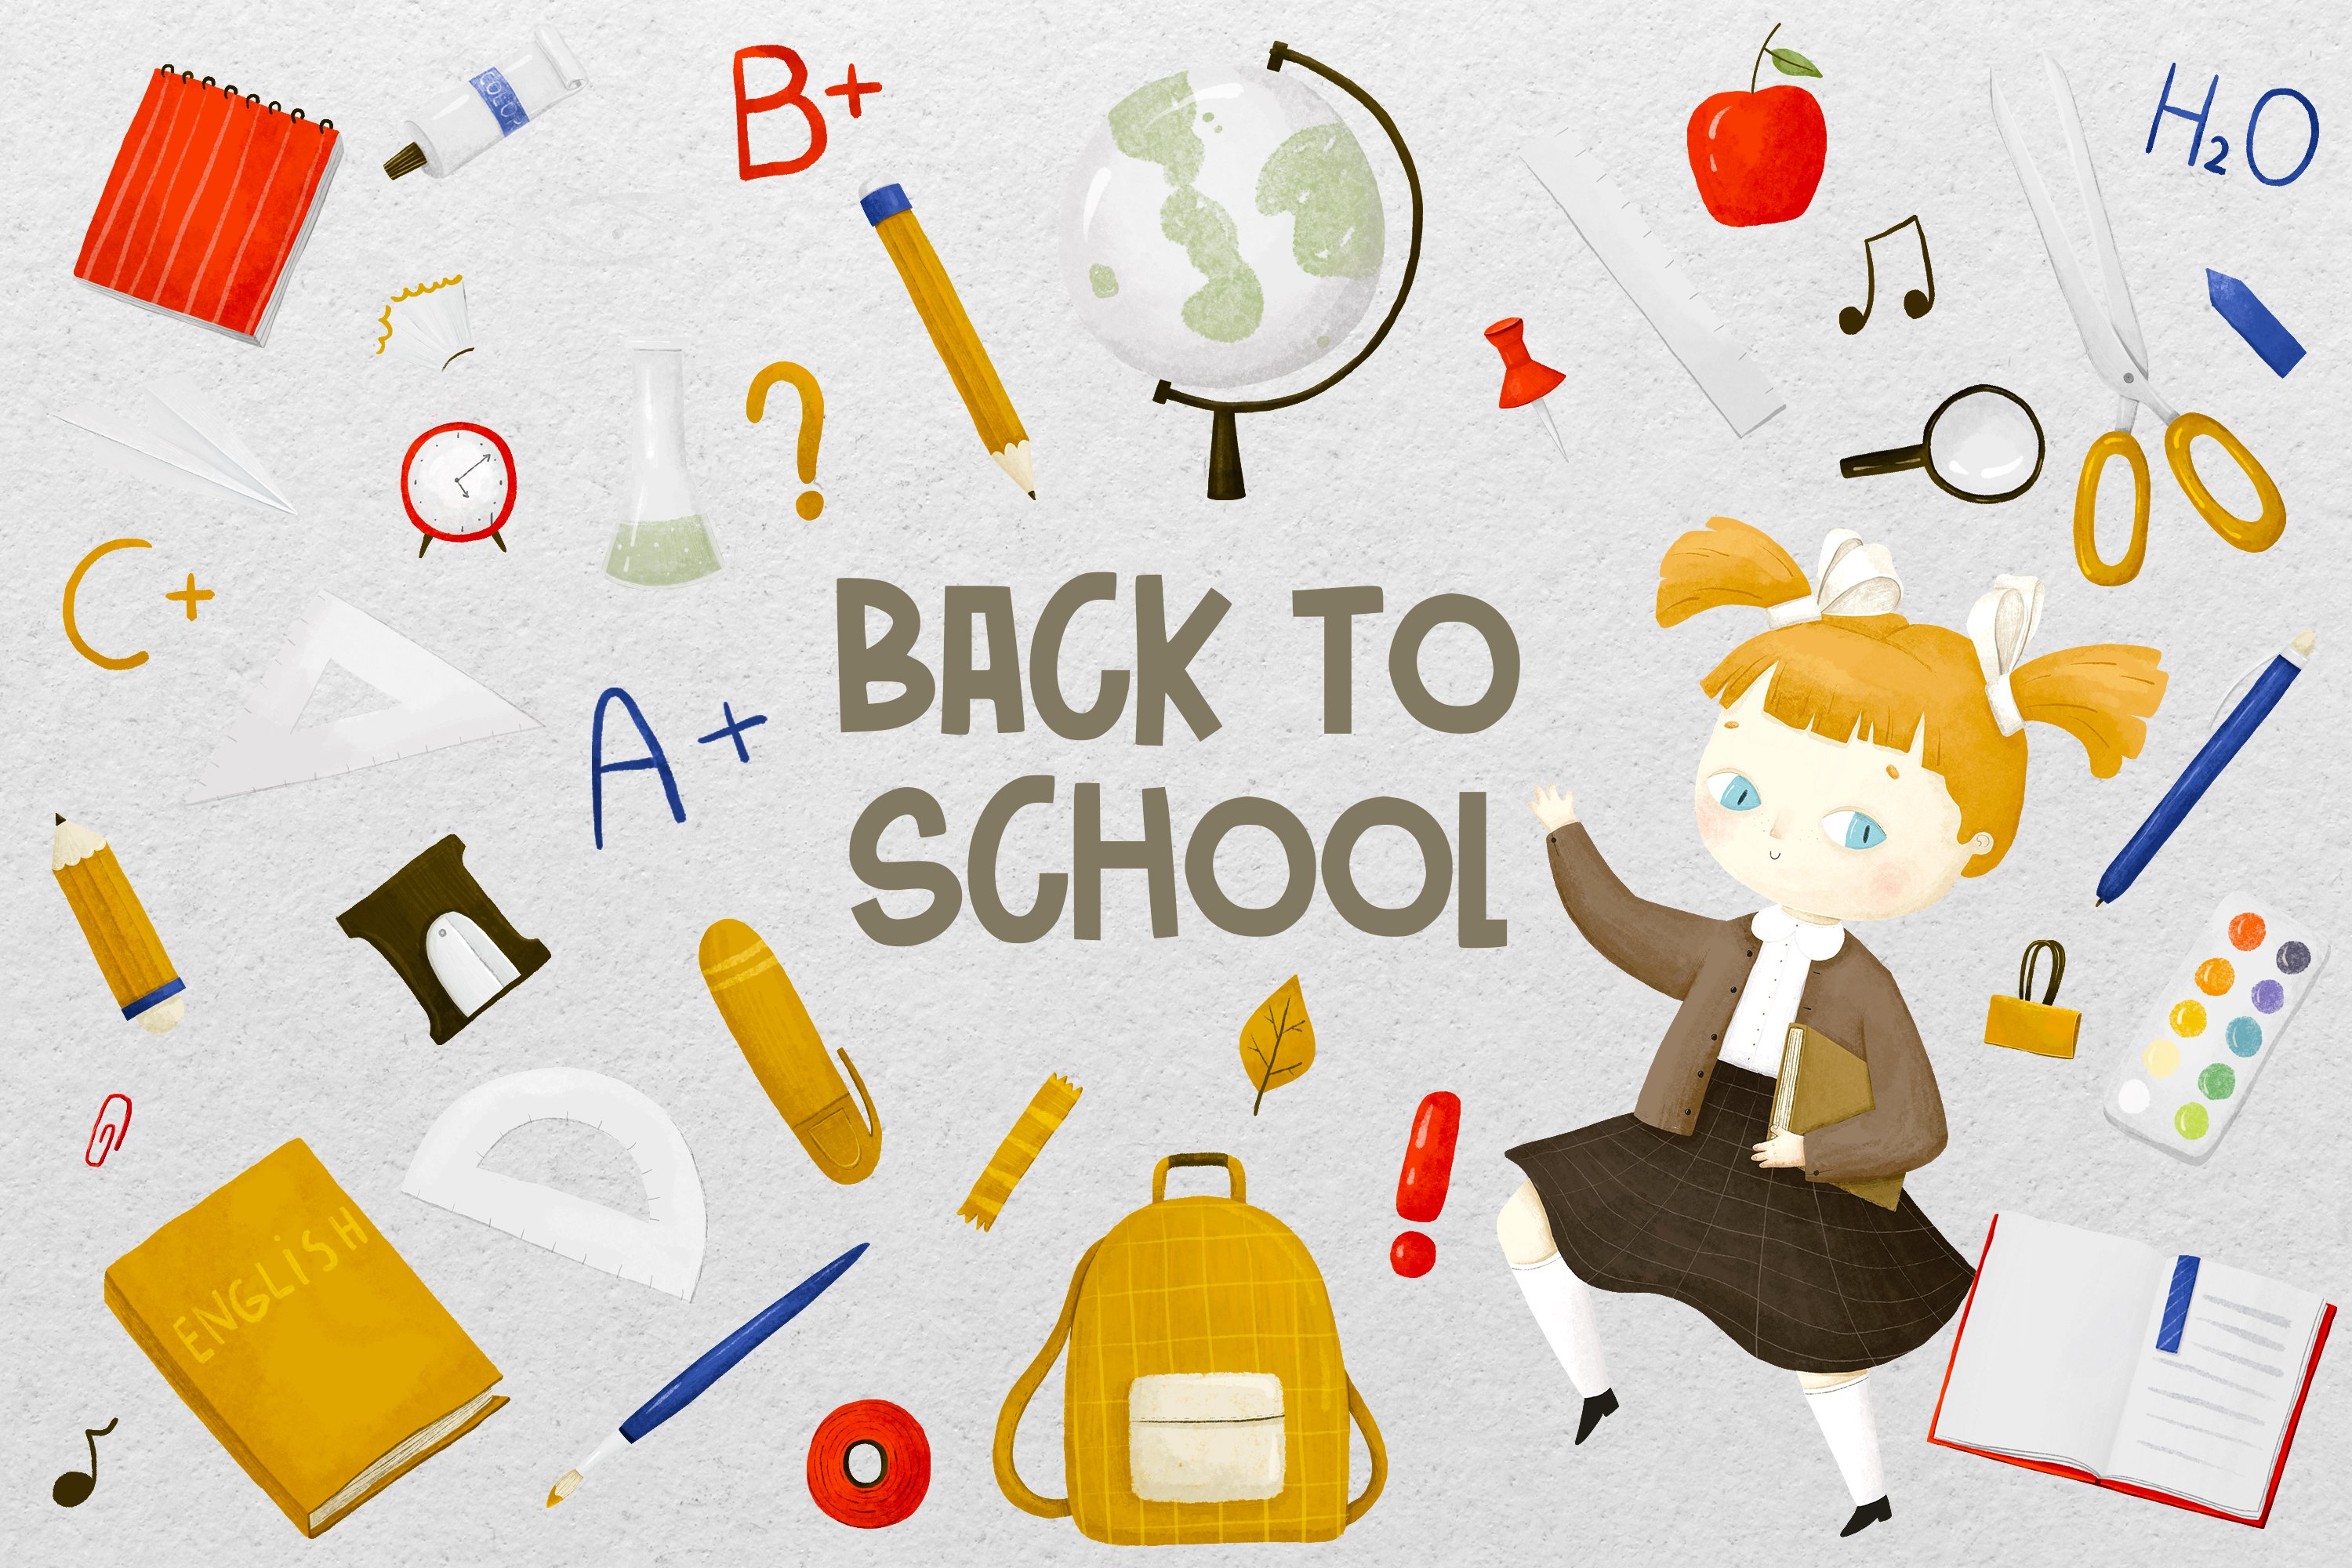 Back to school set, supplies cover image.